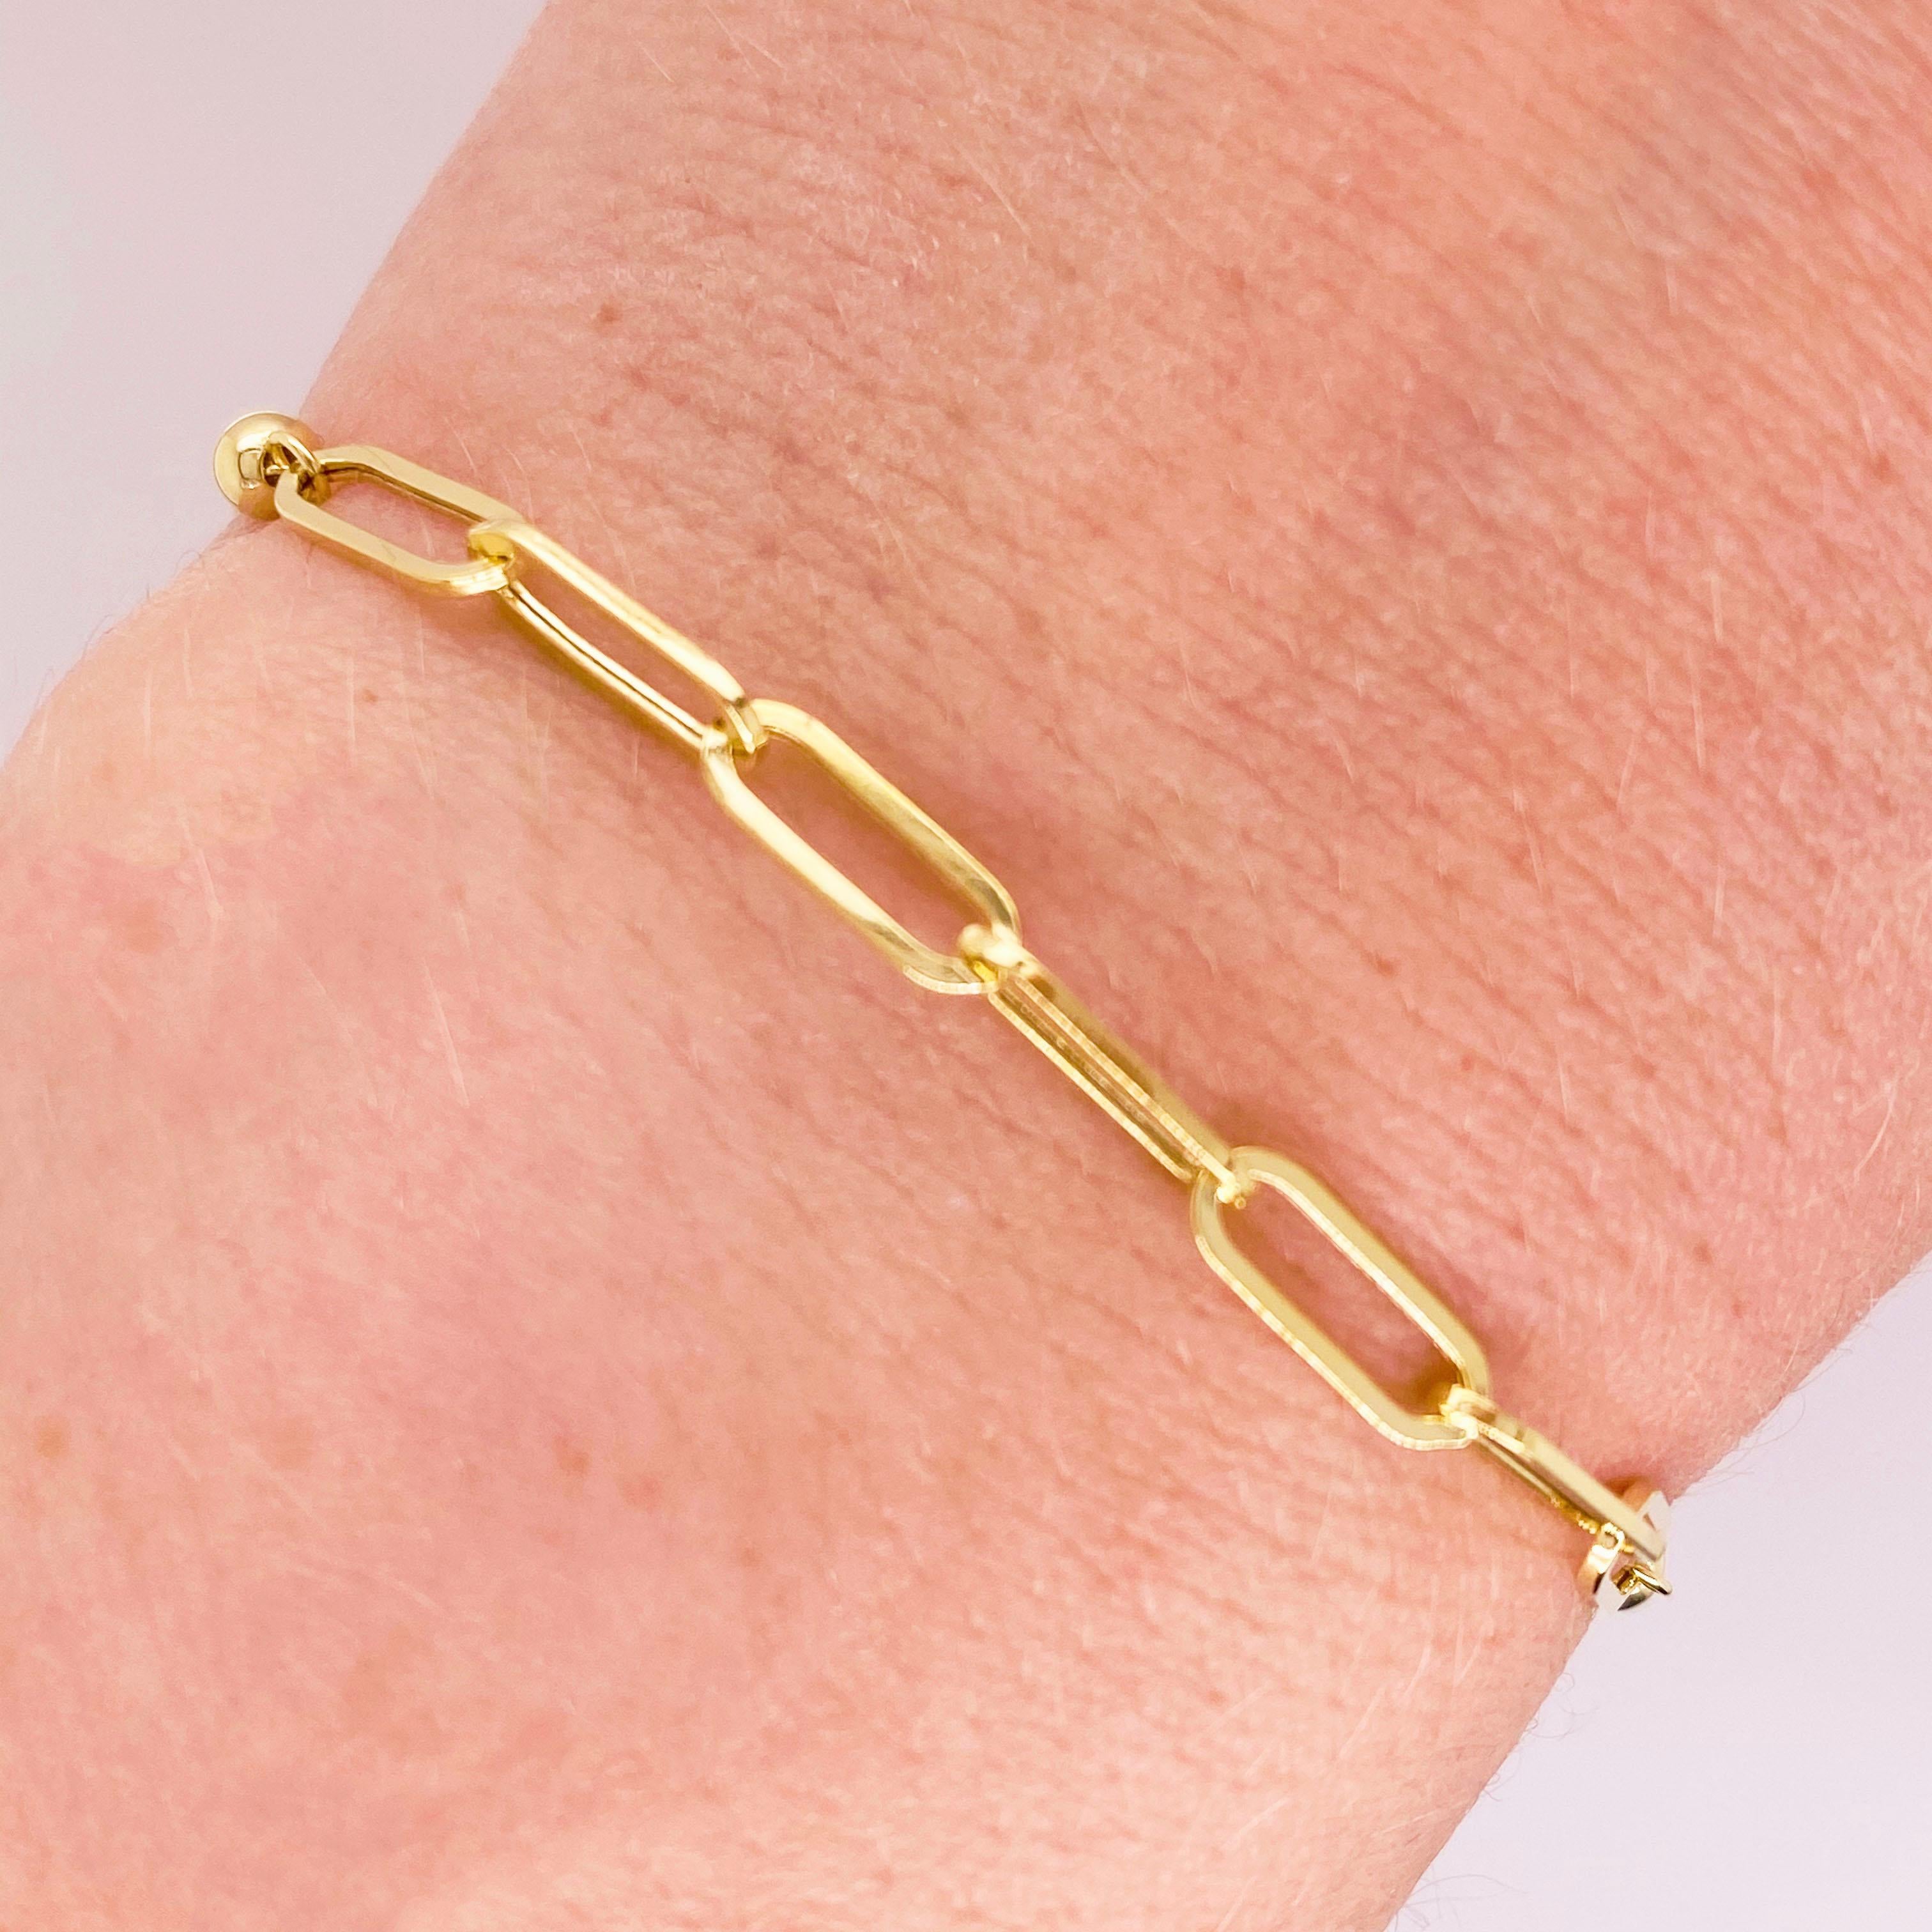 Paper clip chains are the hottest thing in 2020's jewelry fashion! This 14k yellow gold bracelet matches everything and is the perfect addition to any outfit, casual or formal. The bolo clasp on this bracelet allows you to wear it as snugly or